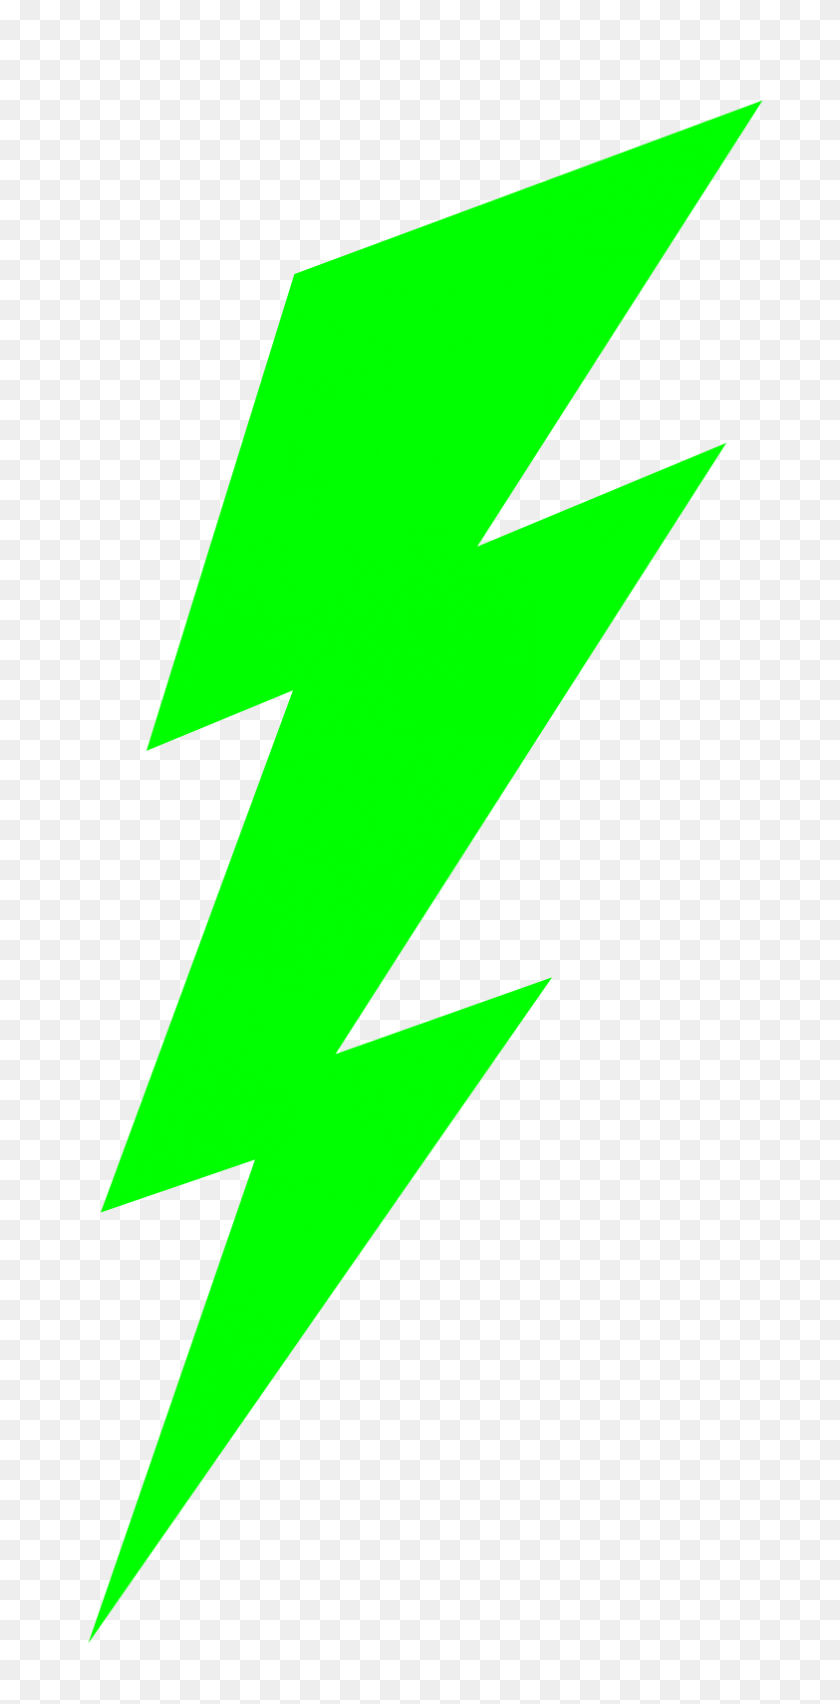 783x1651 Change For Good Prizes For Everyone Who Gets Involved In Green - Green Lightning PNG